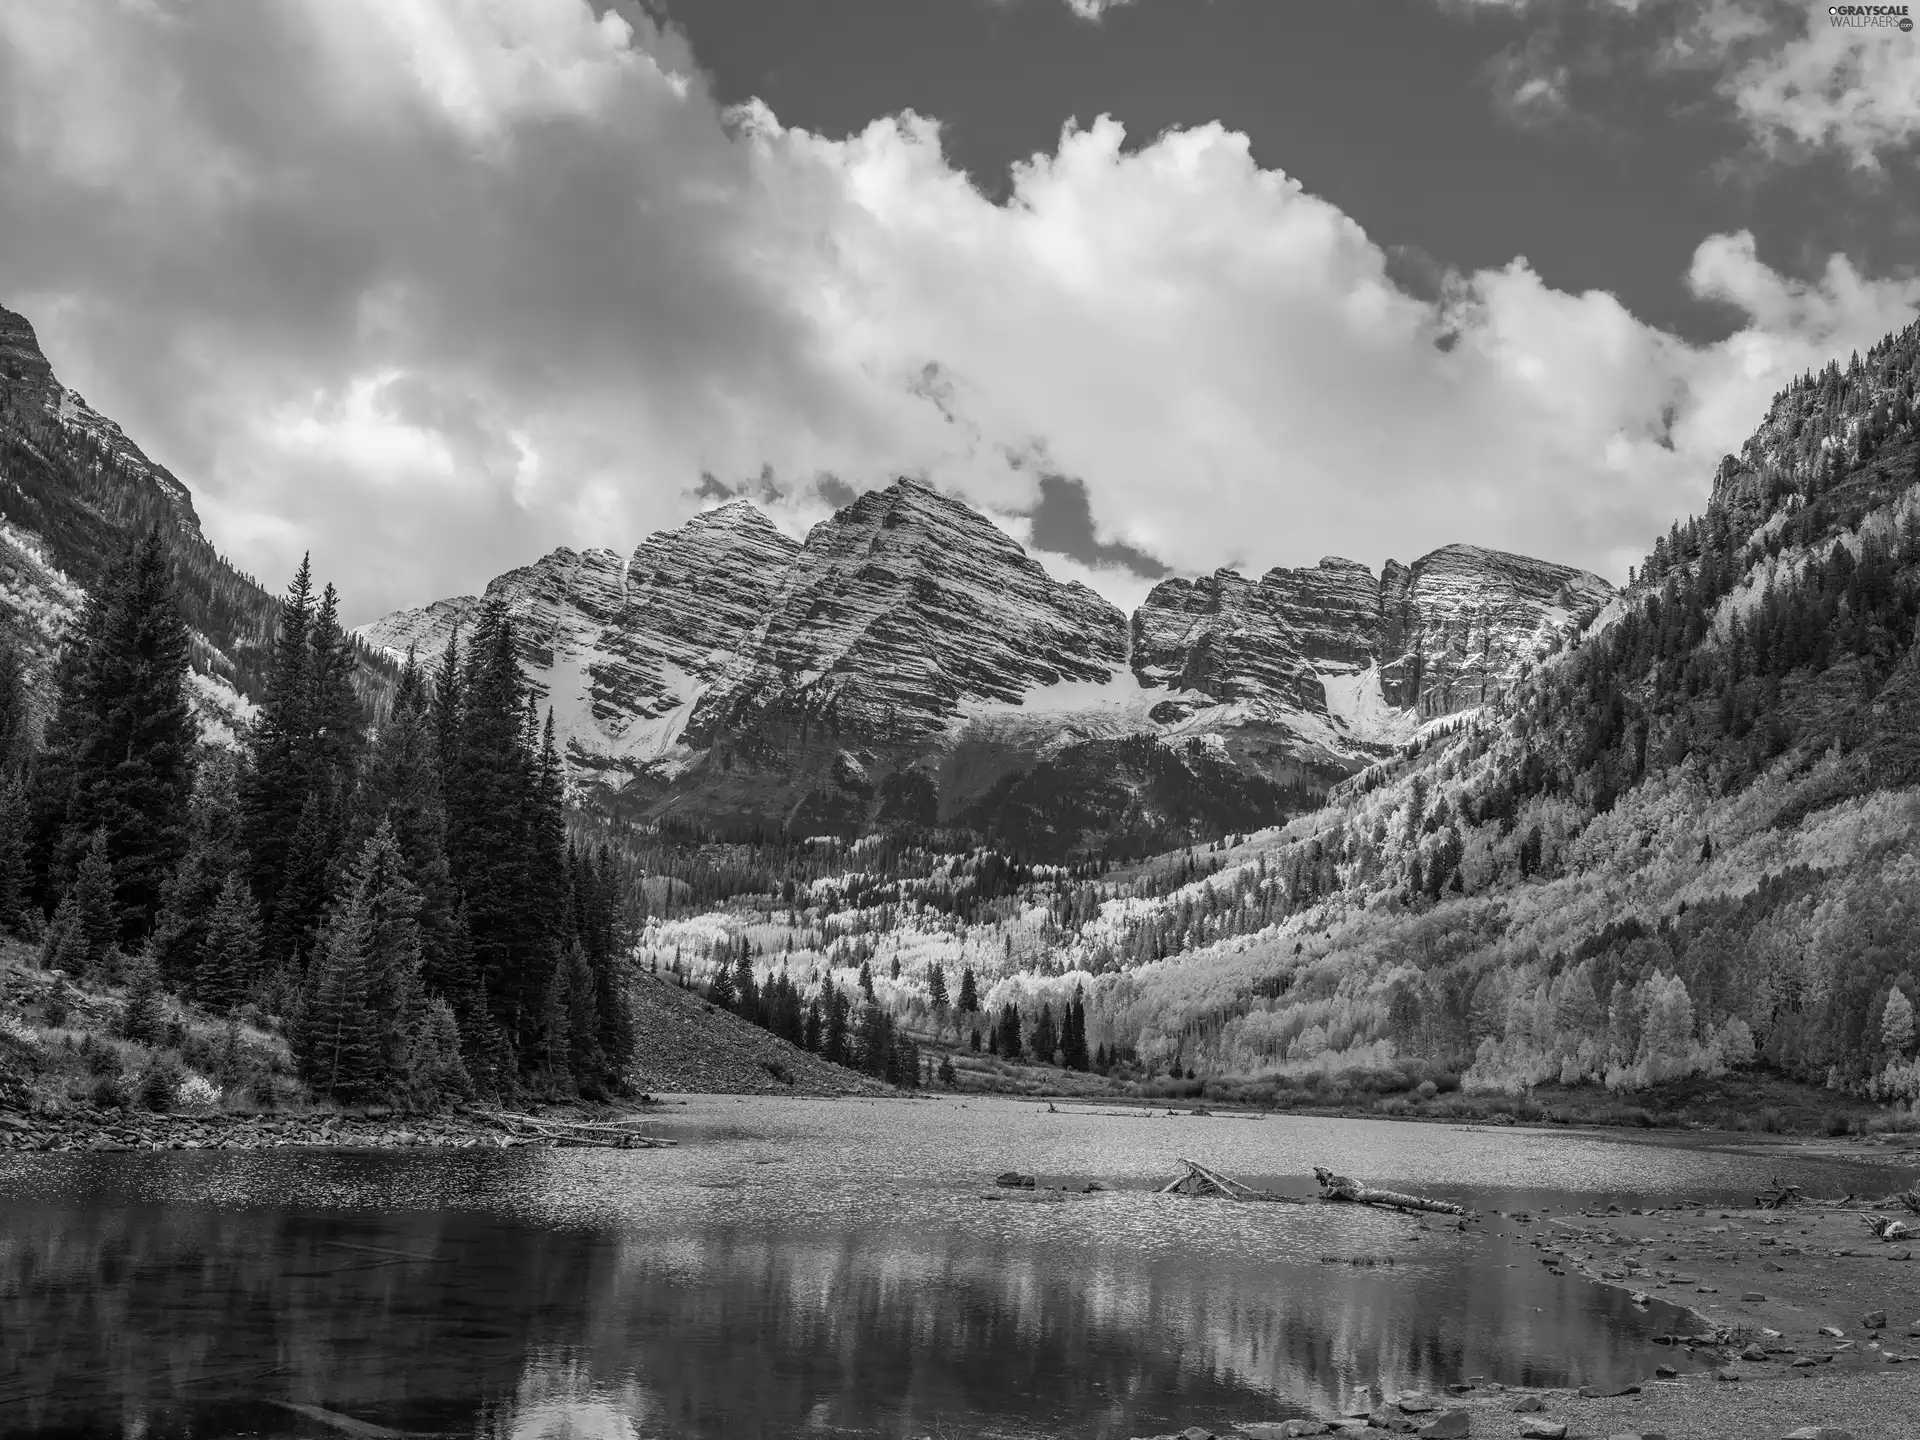 State of Colorado, The United States, Snowy, rocky mountains, viewes, Sky, Maroon Lake, trees, Maroon Bells Peaks